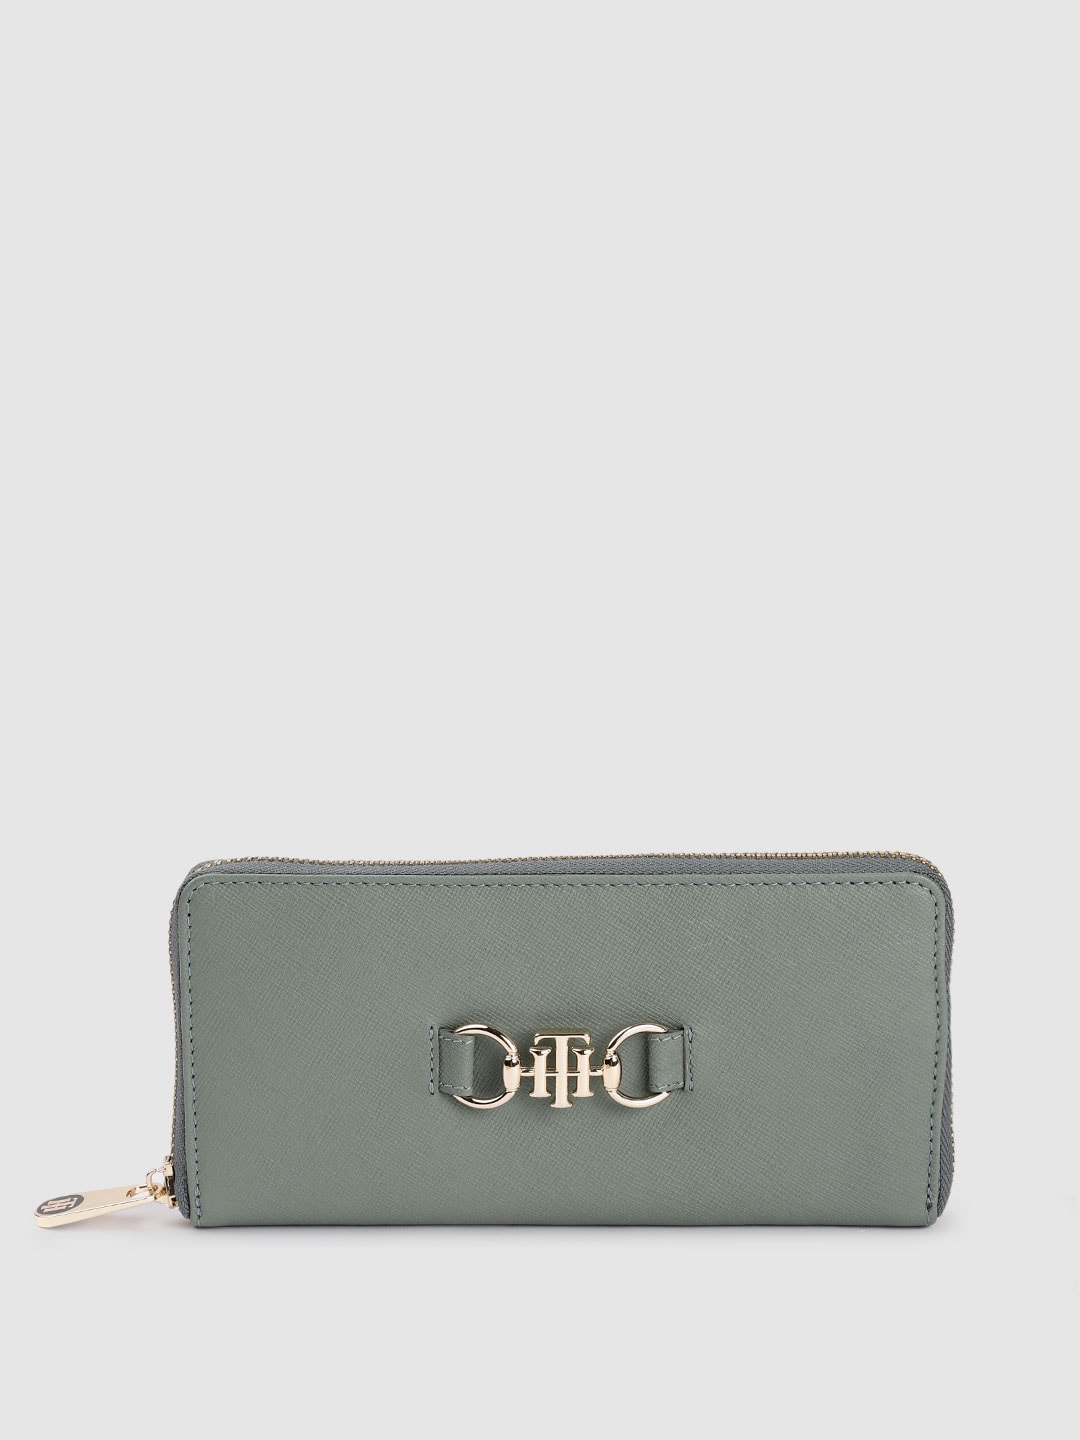 Tommy Hilfiger Women Olive Green Leather Zip Around Wallet Price in India